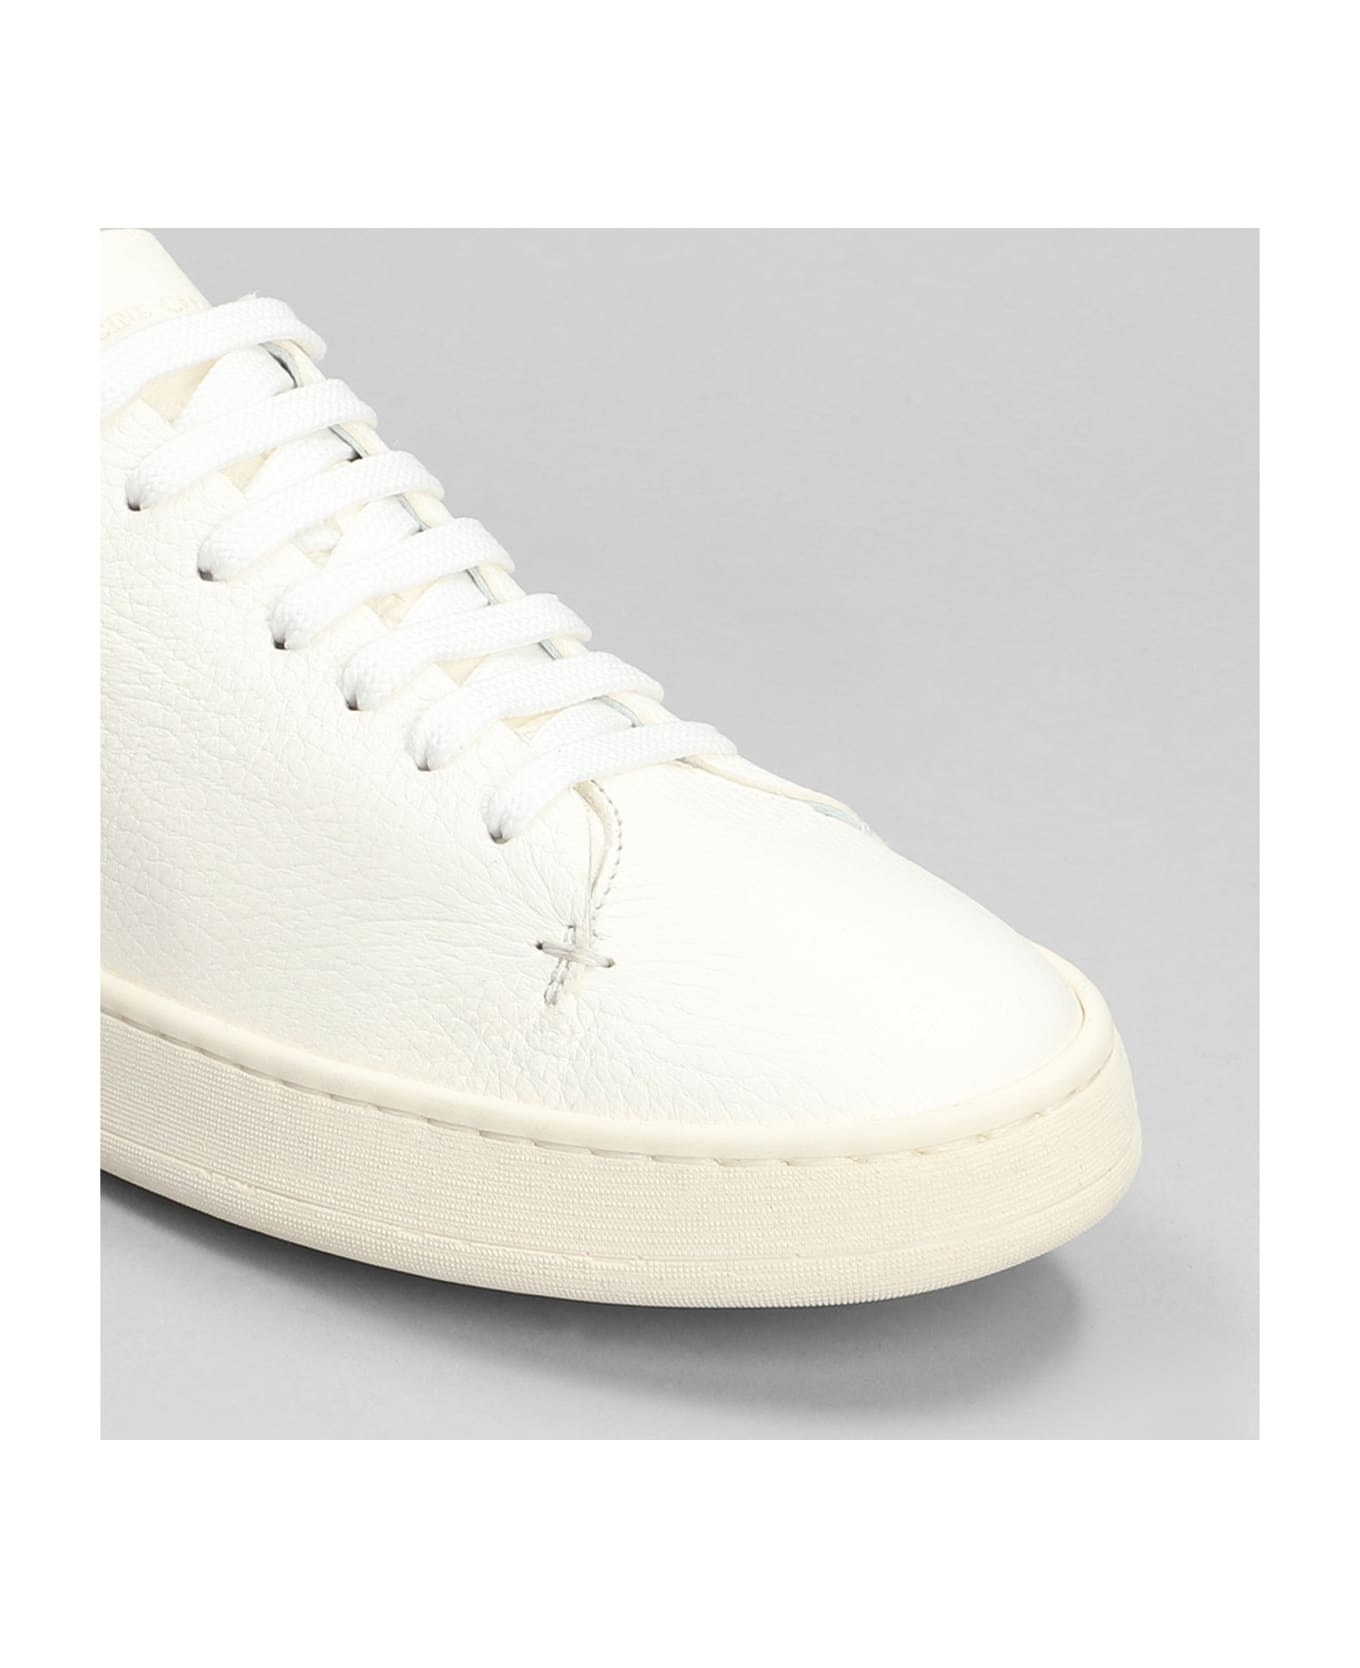 Officine Creative Once 002 Sneakers In White Leather - white スニーカー